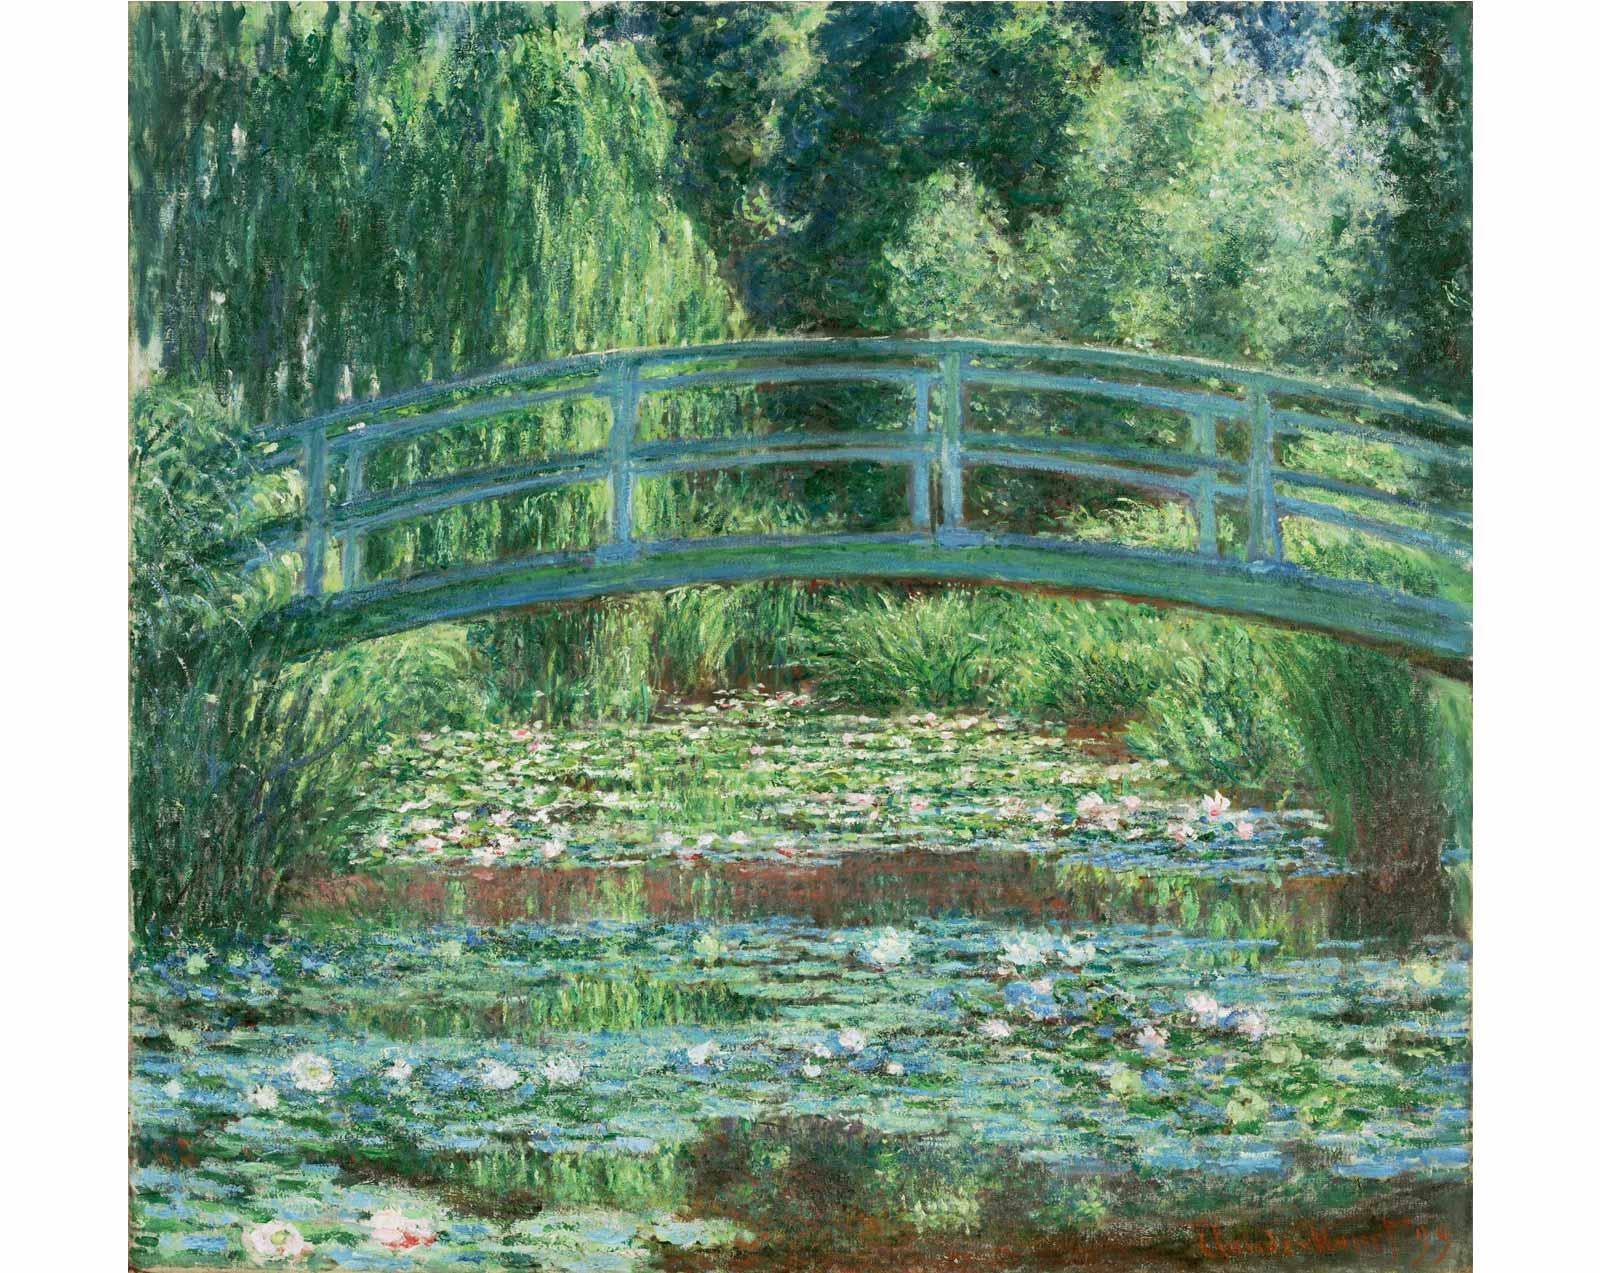 Japanese Footbridge and the Water Lily Pool, Giverny, 1899, by Claude Monet.